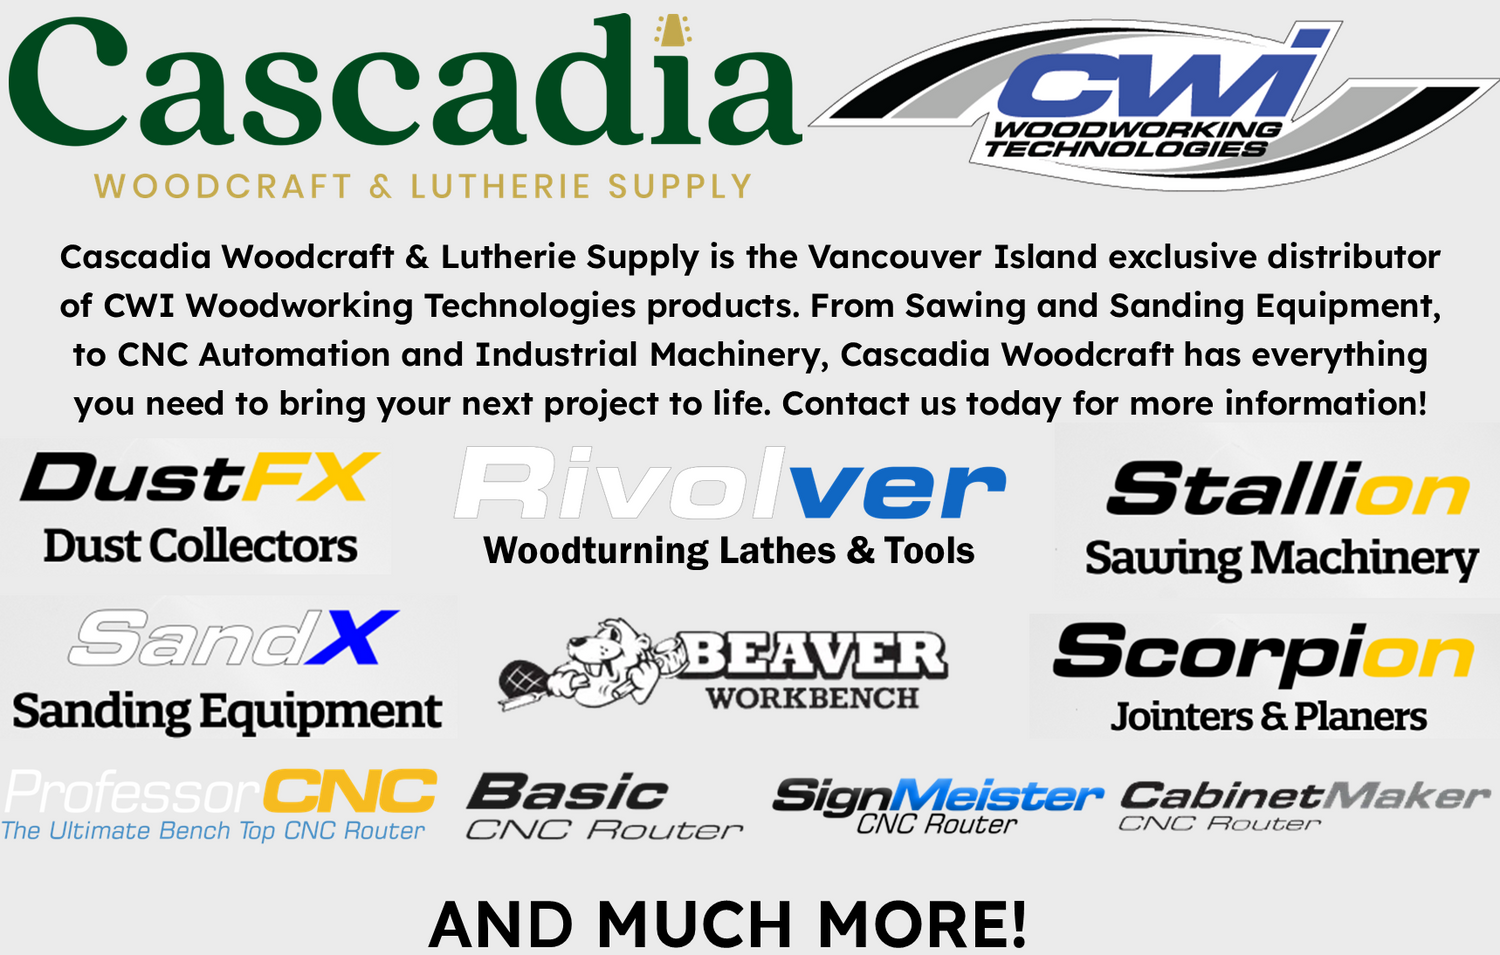 Cascadia is Proud to Provide The Highest Quality Woodworking Tools, Machines & Equipment For Your Next Project